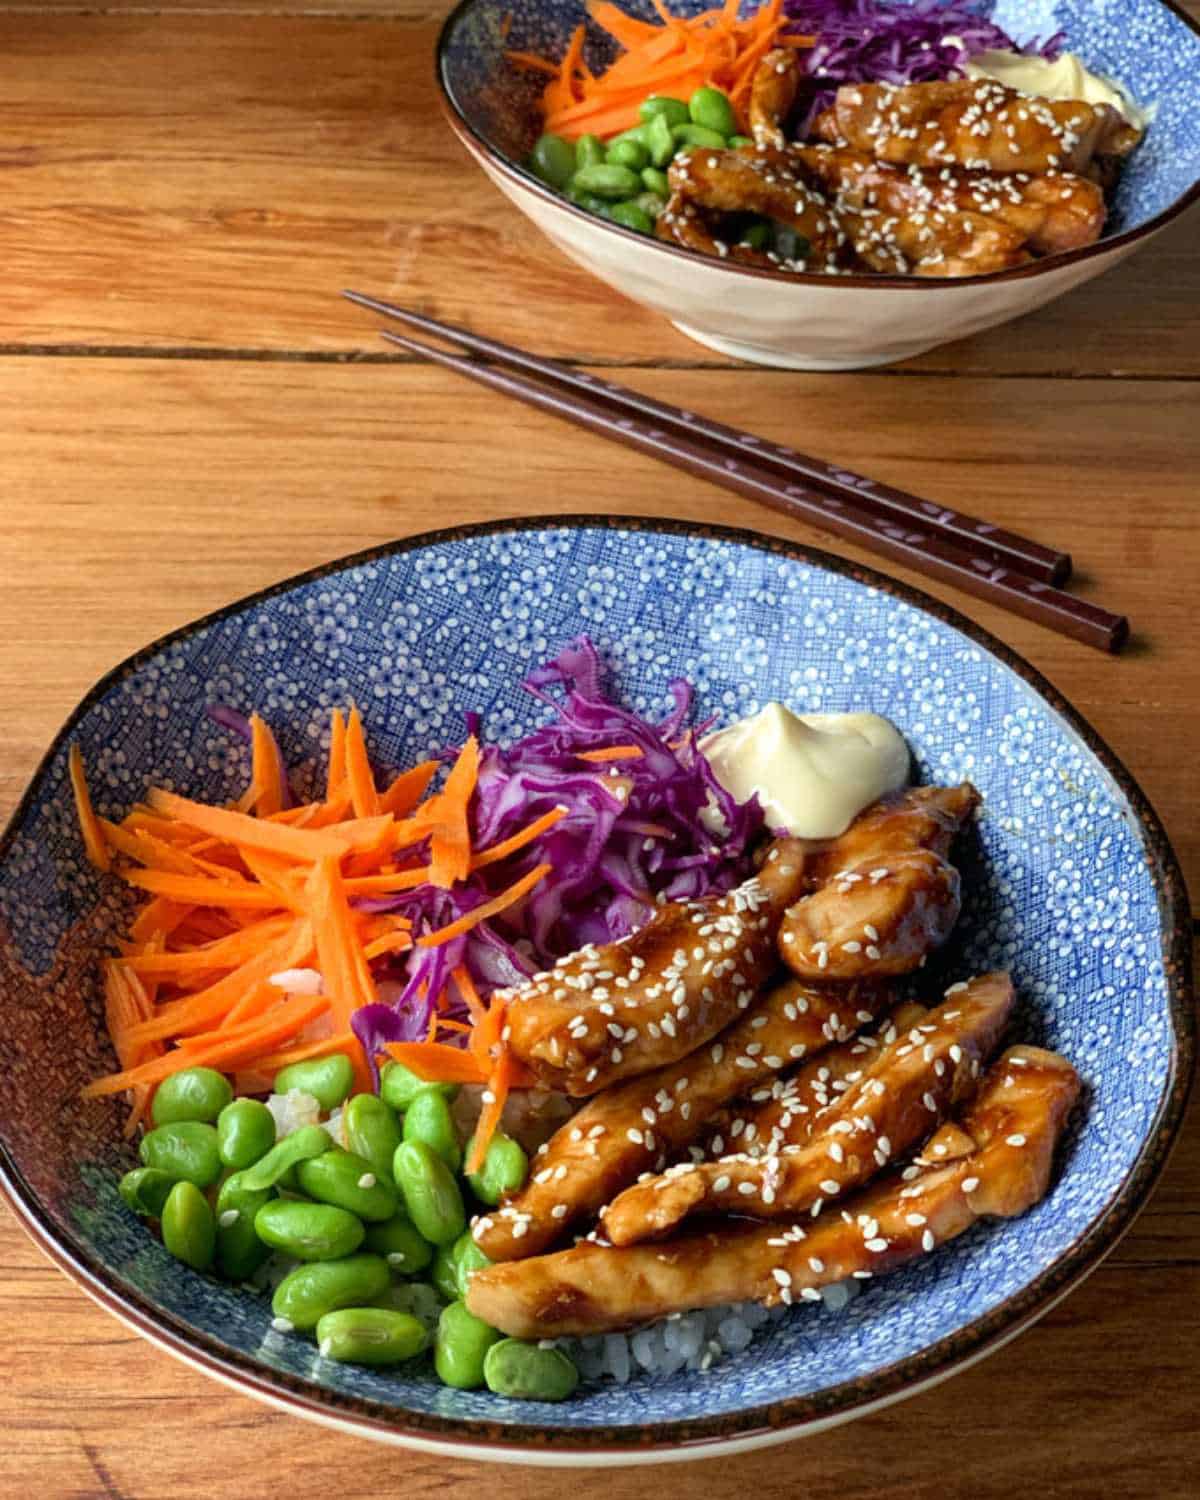 Two bowls of Teriyaki chicken sitting on a wooden table.